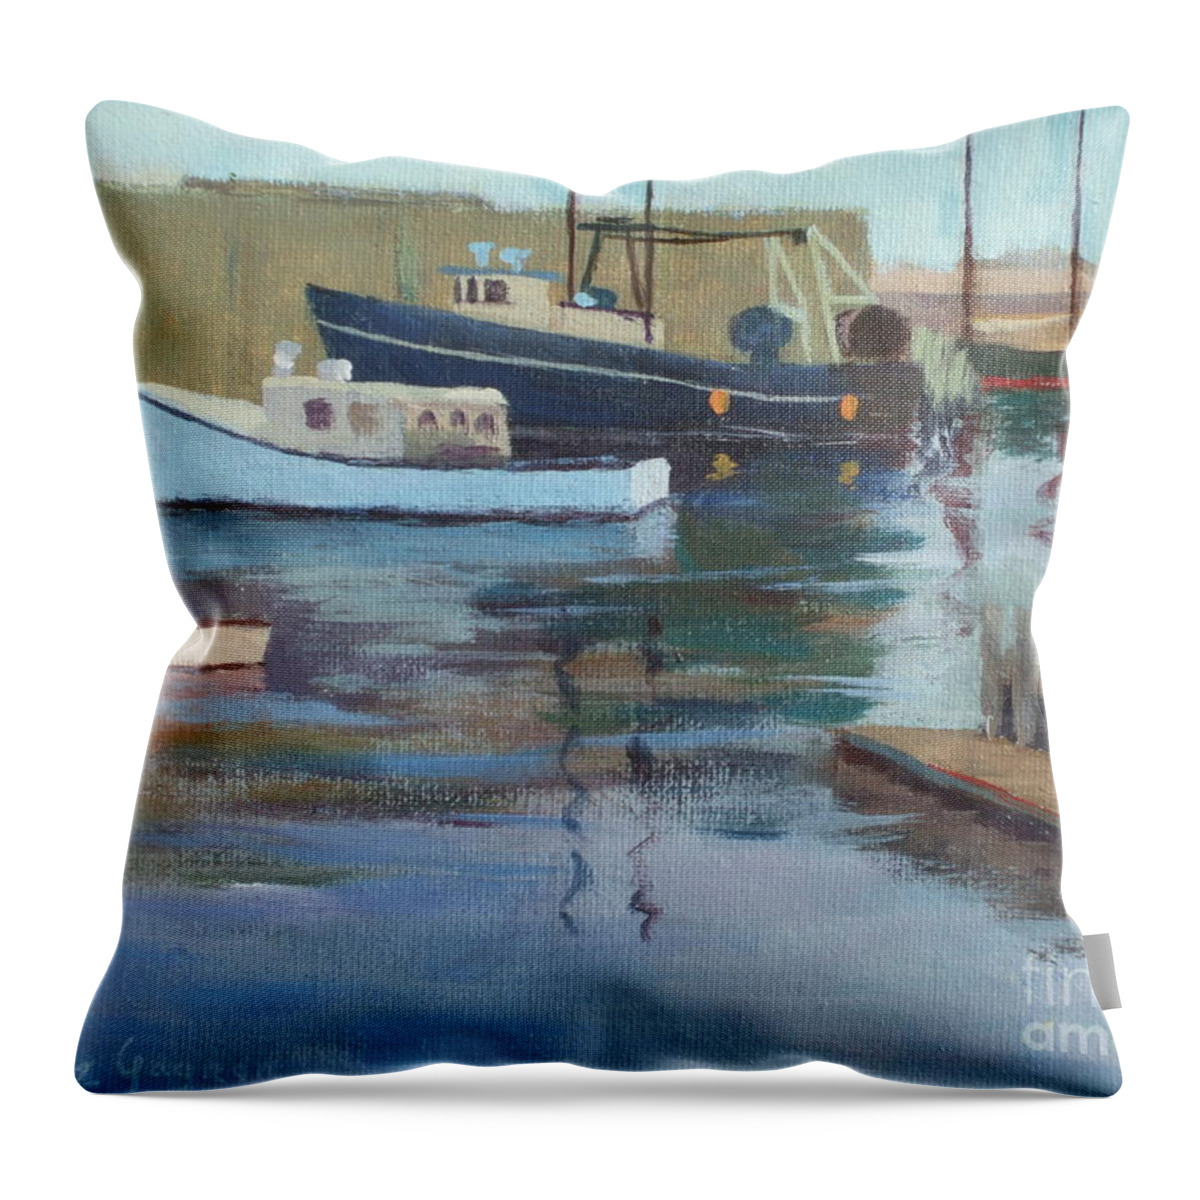 Gloucester Harbor Throw Pillow featuring the painting Gloucester Harbor by Claire Gagnon